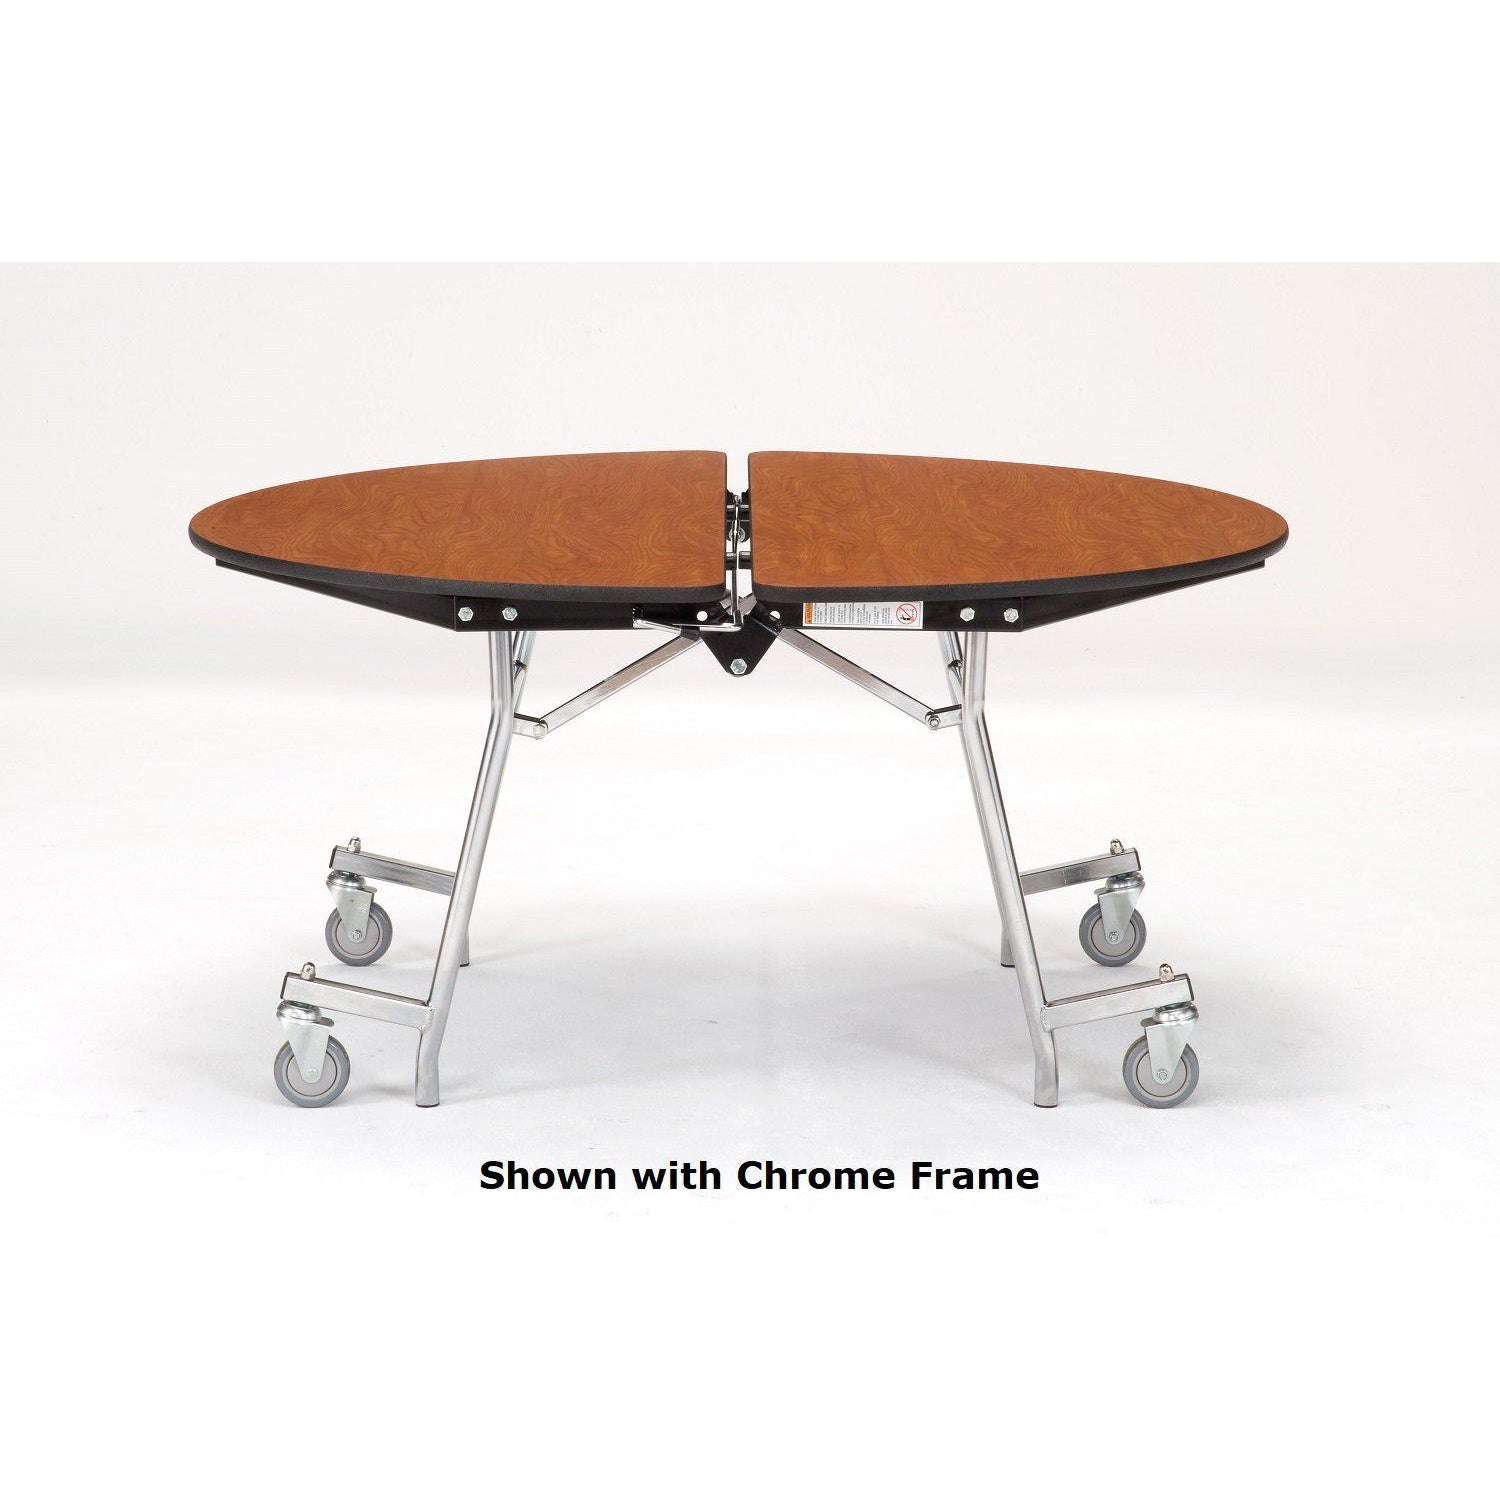 Mobile Shape Cafeteria Table, 72" Round, MDF Core, Black ProtectEdge, Chrome Frame